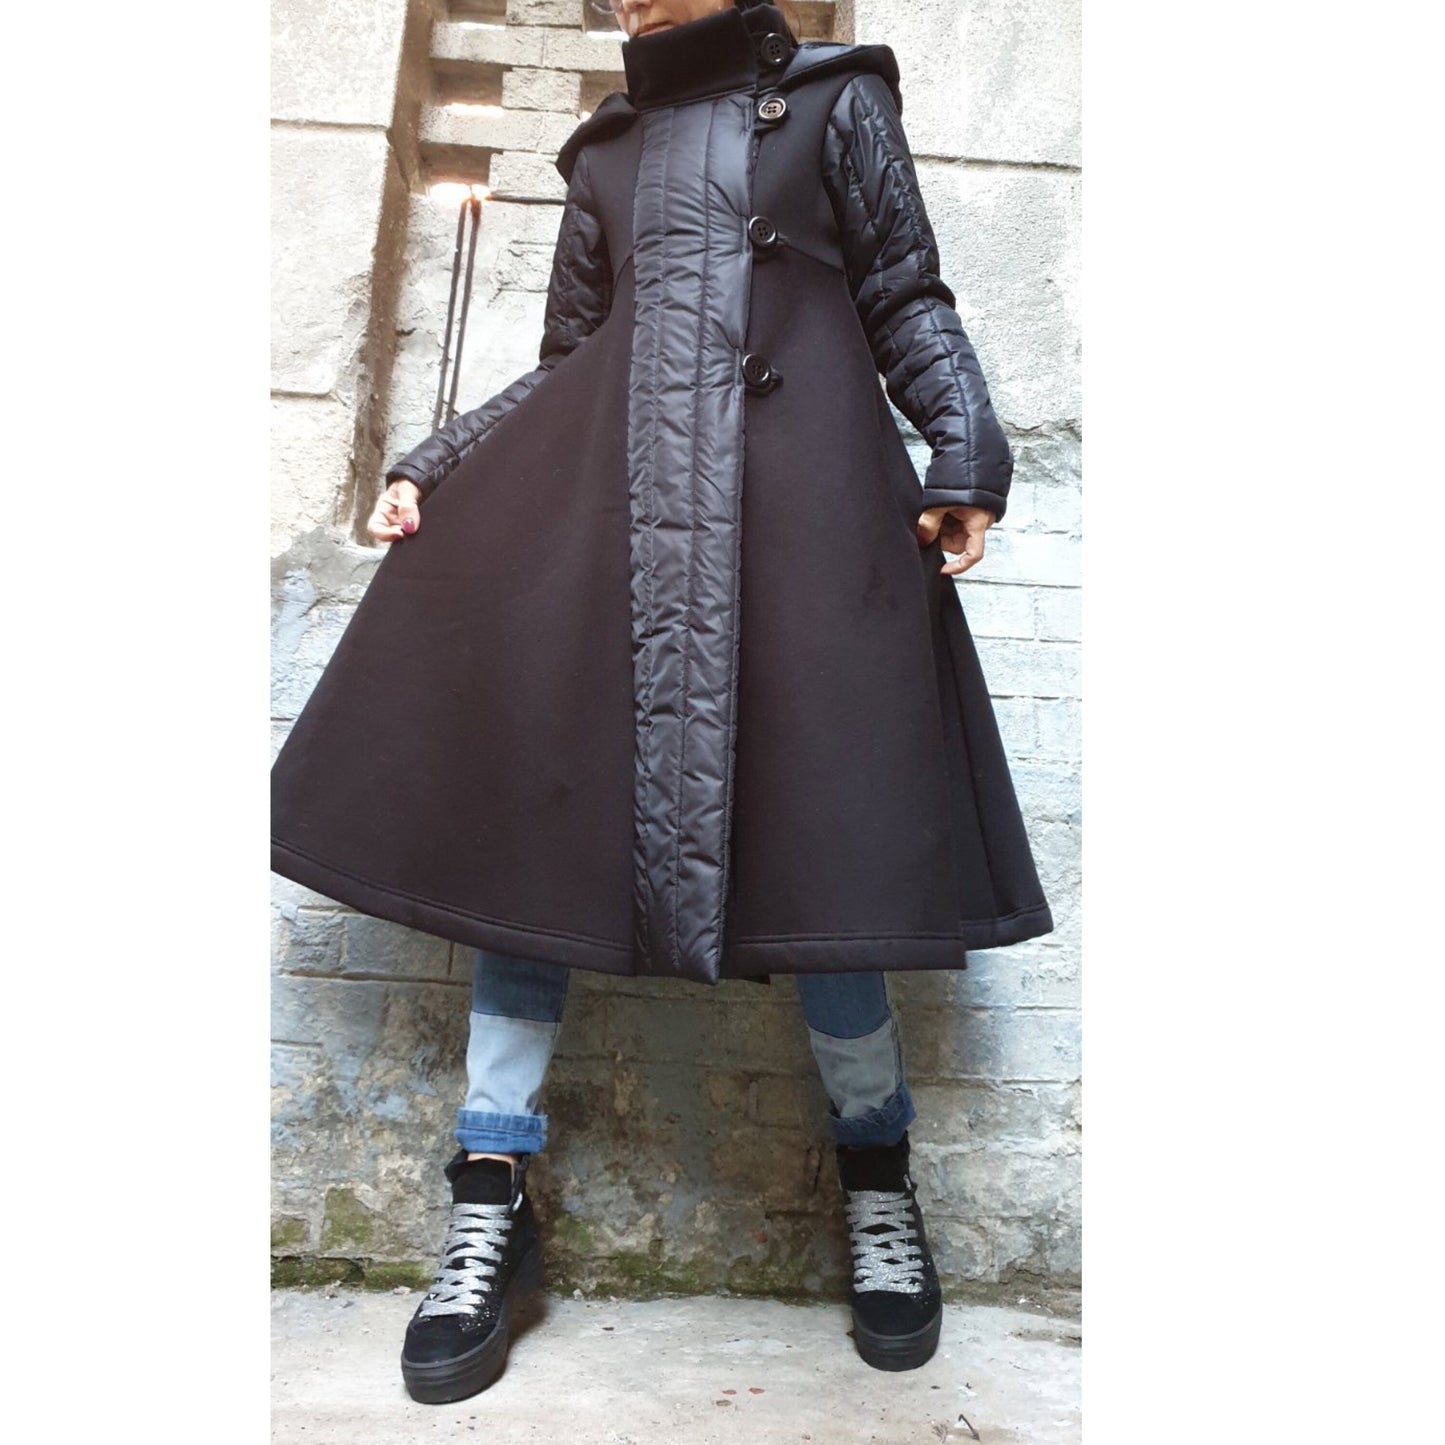 New Collection Winter Coat - Handmade clothing from AngelBySilvia - Top Designer Brands 